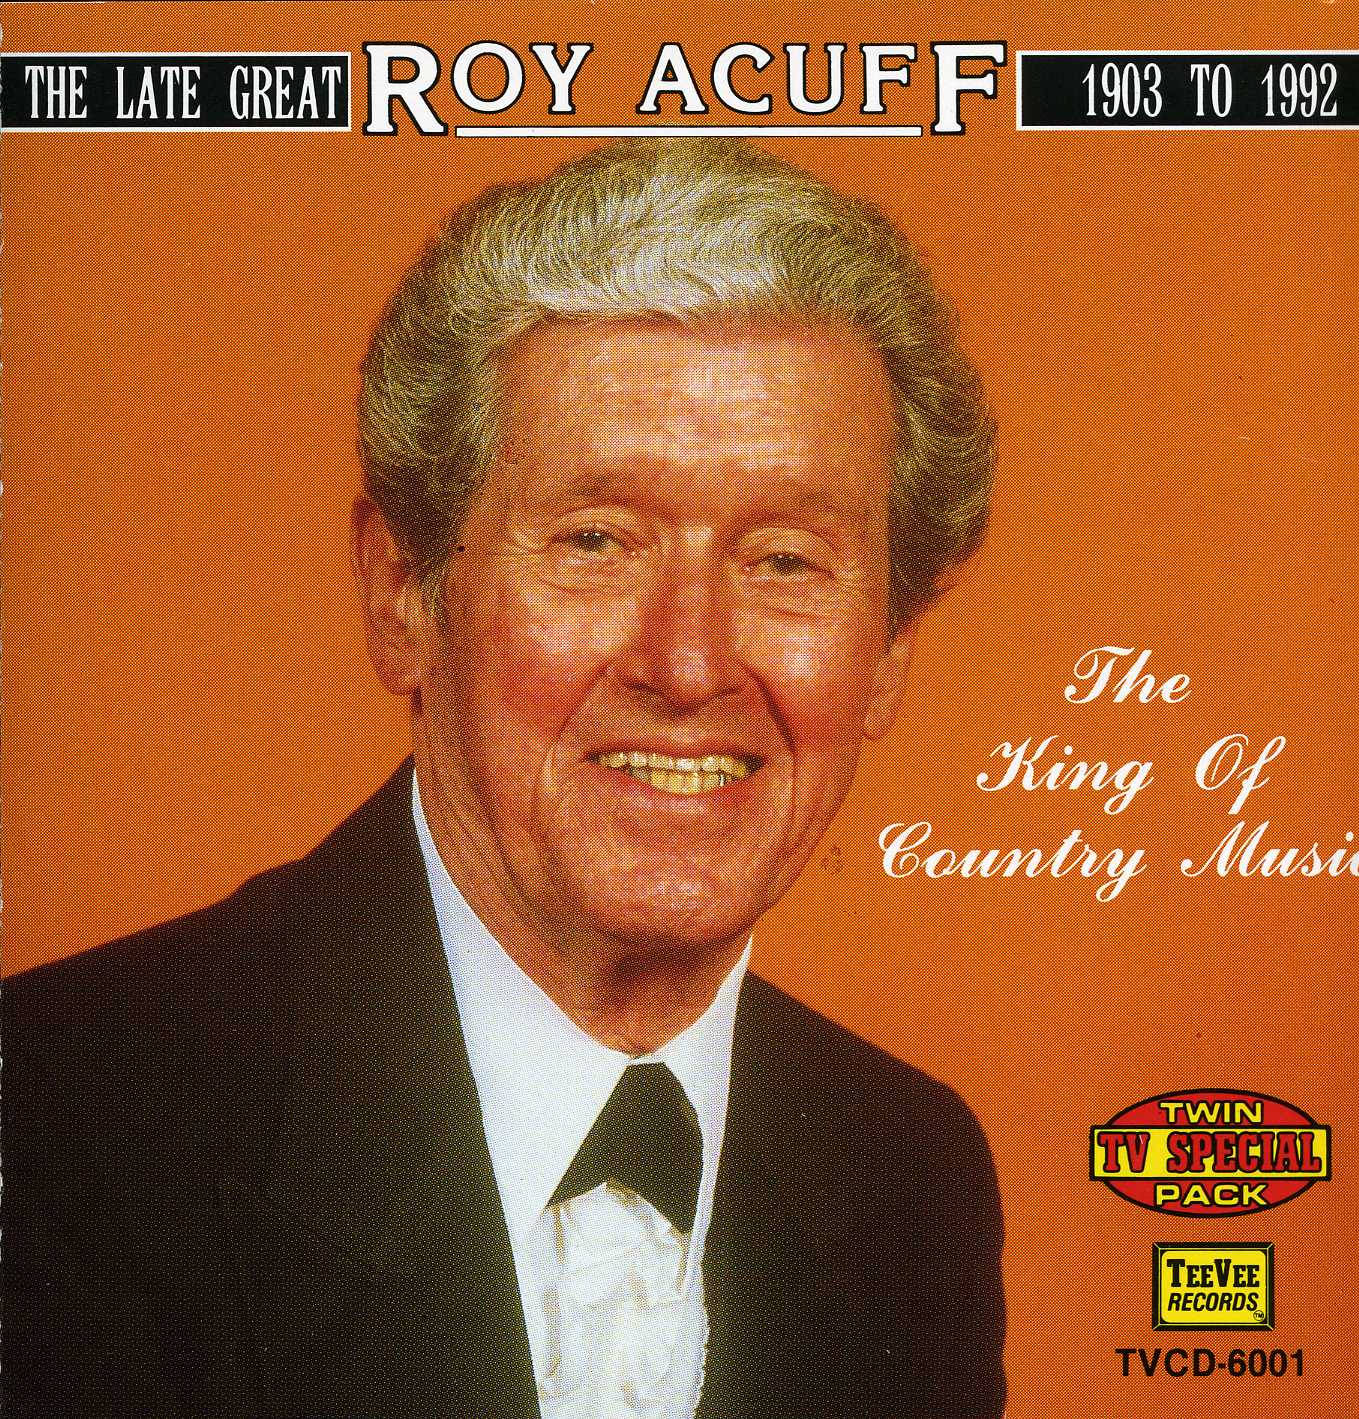 The Late Great Roy Acuff Album Wallpaper